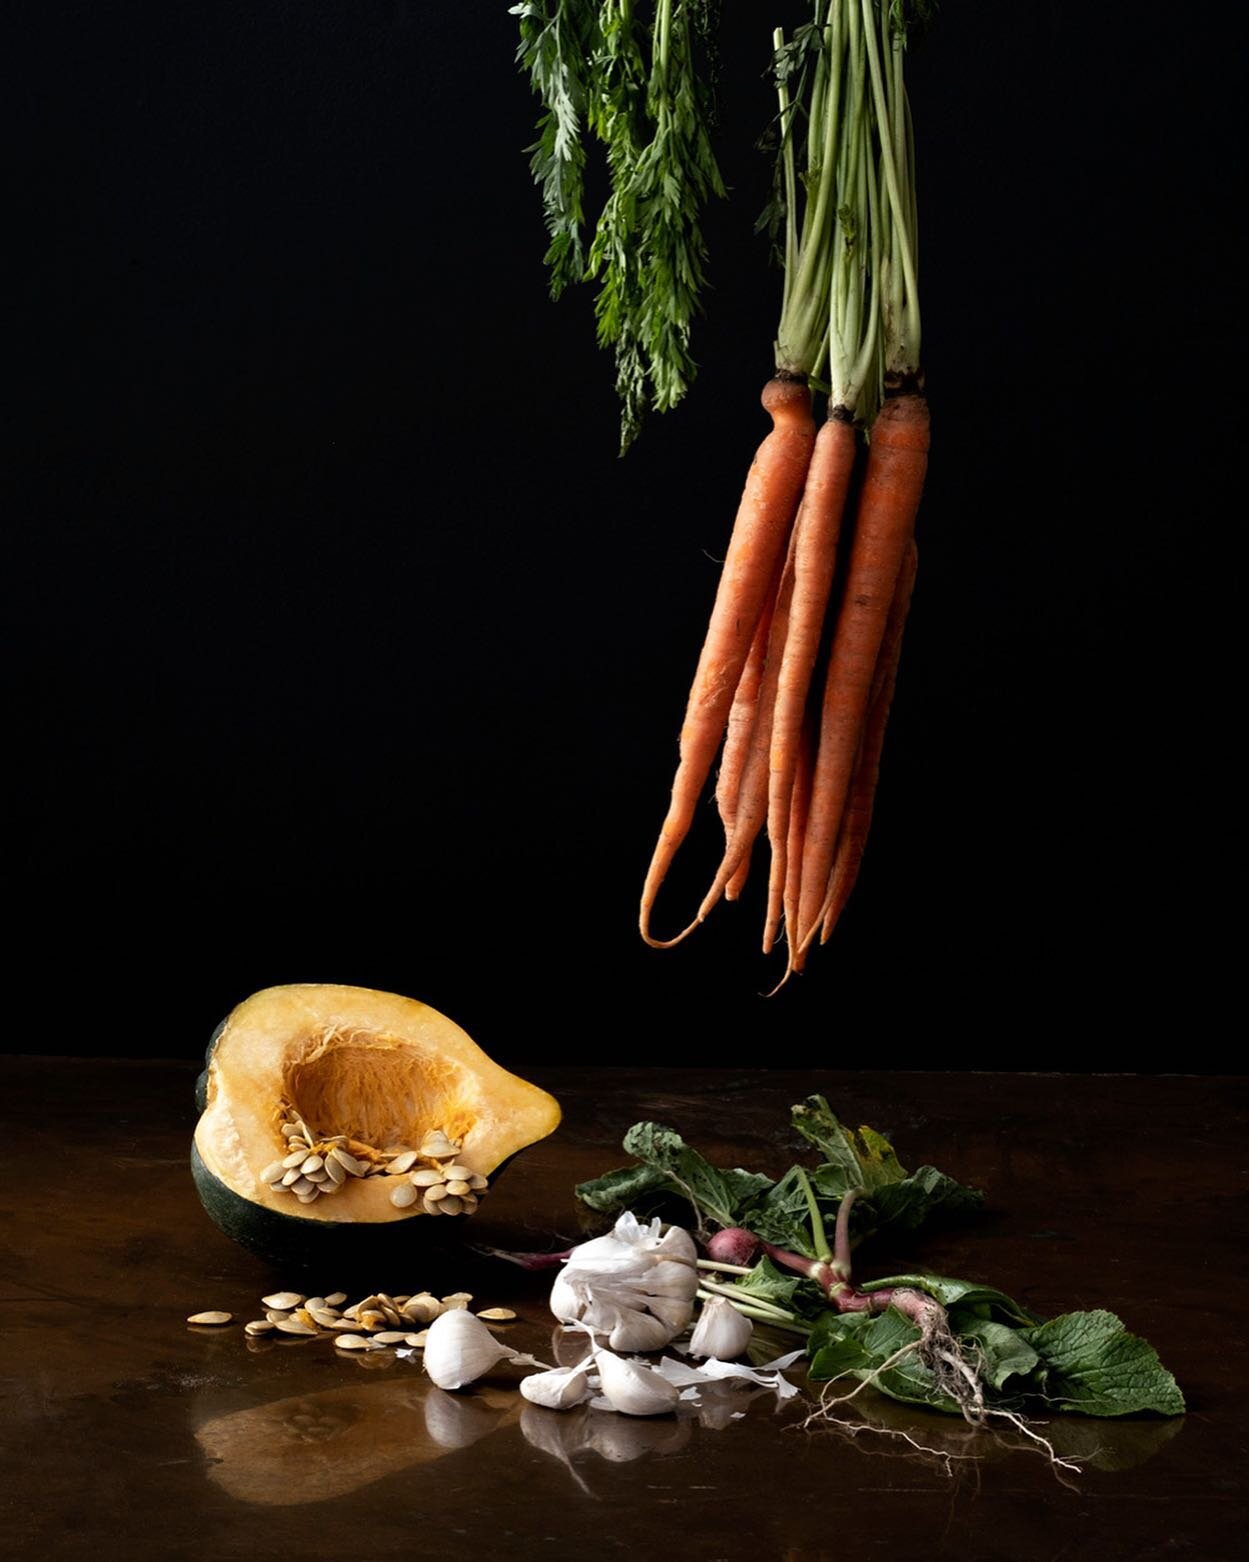 What lies behind us and what lies before us are tiny matters, compared to what lies within us.&quot; - Ralph Waldo Emerson

View full size image on my website...
Photograph of Carrot, Squash, Garlic 
-from the series Bodeg&oacute;n (Still Life)
Archi